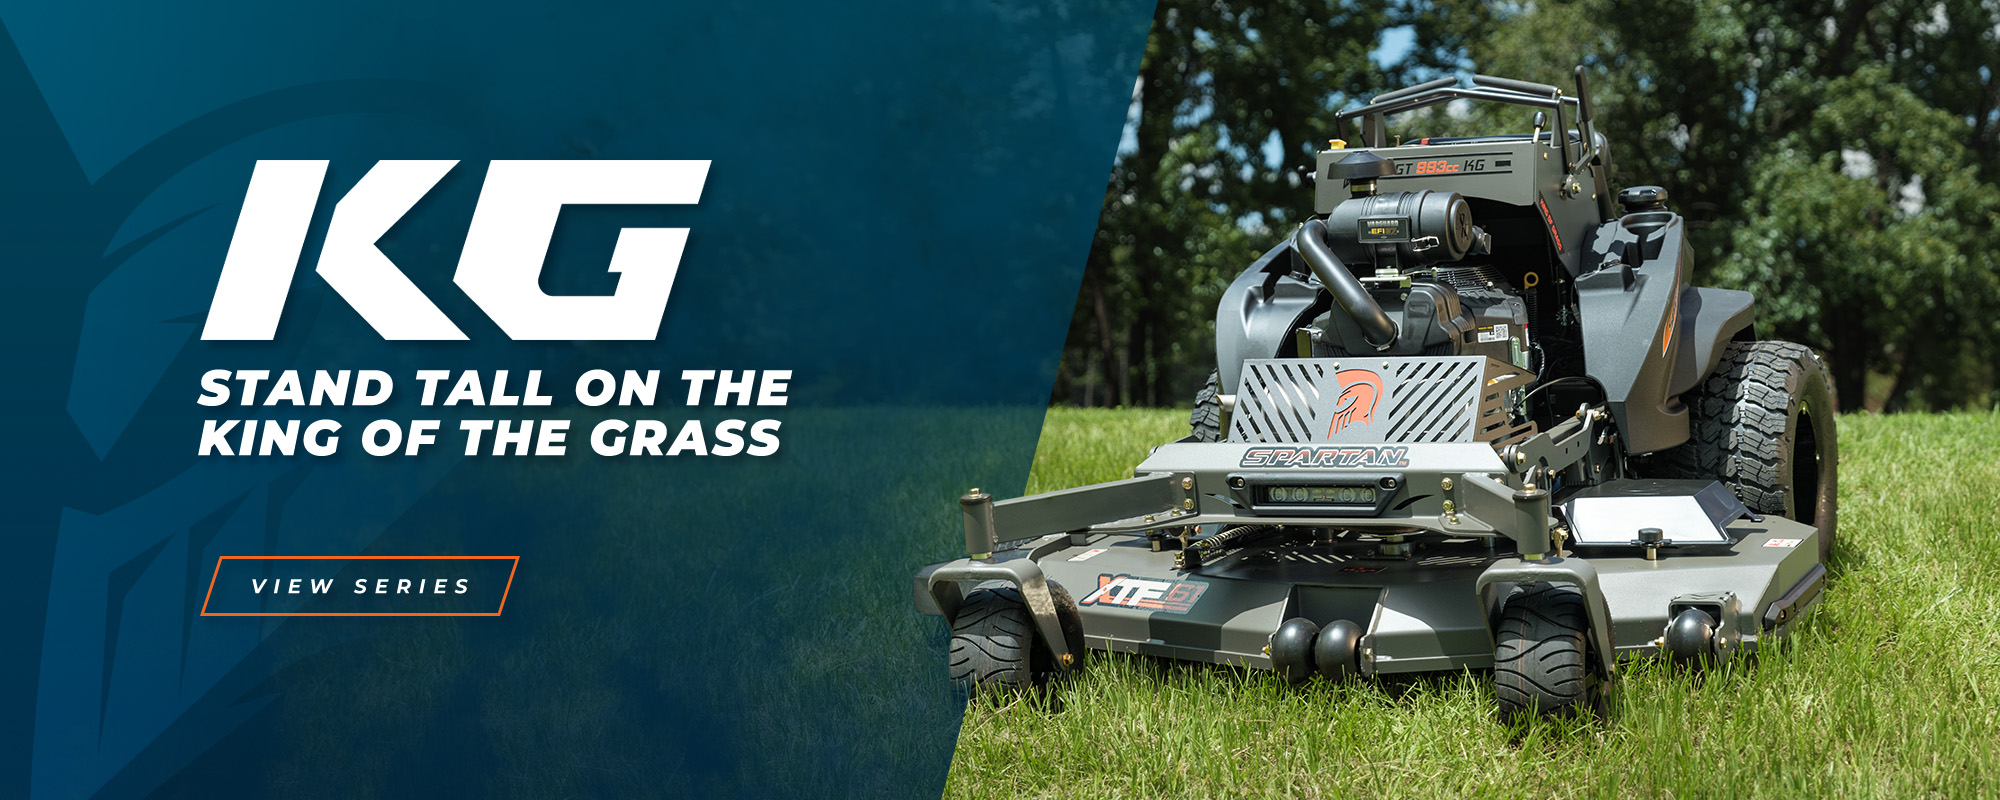 KG Mower ad. Stand tall on the king of the grass.